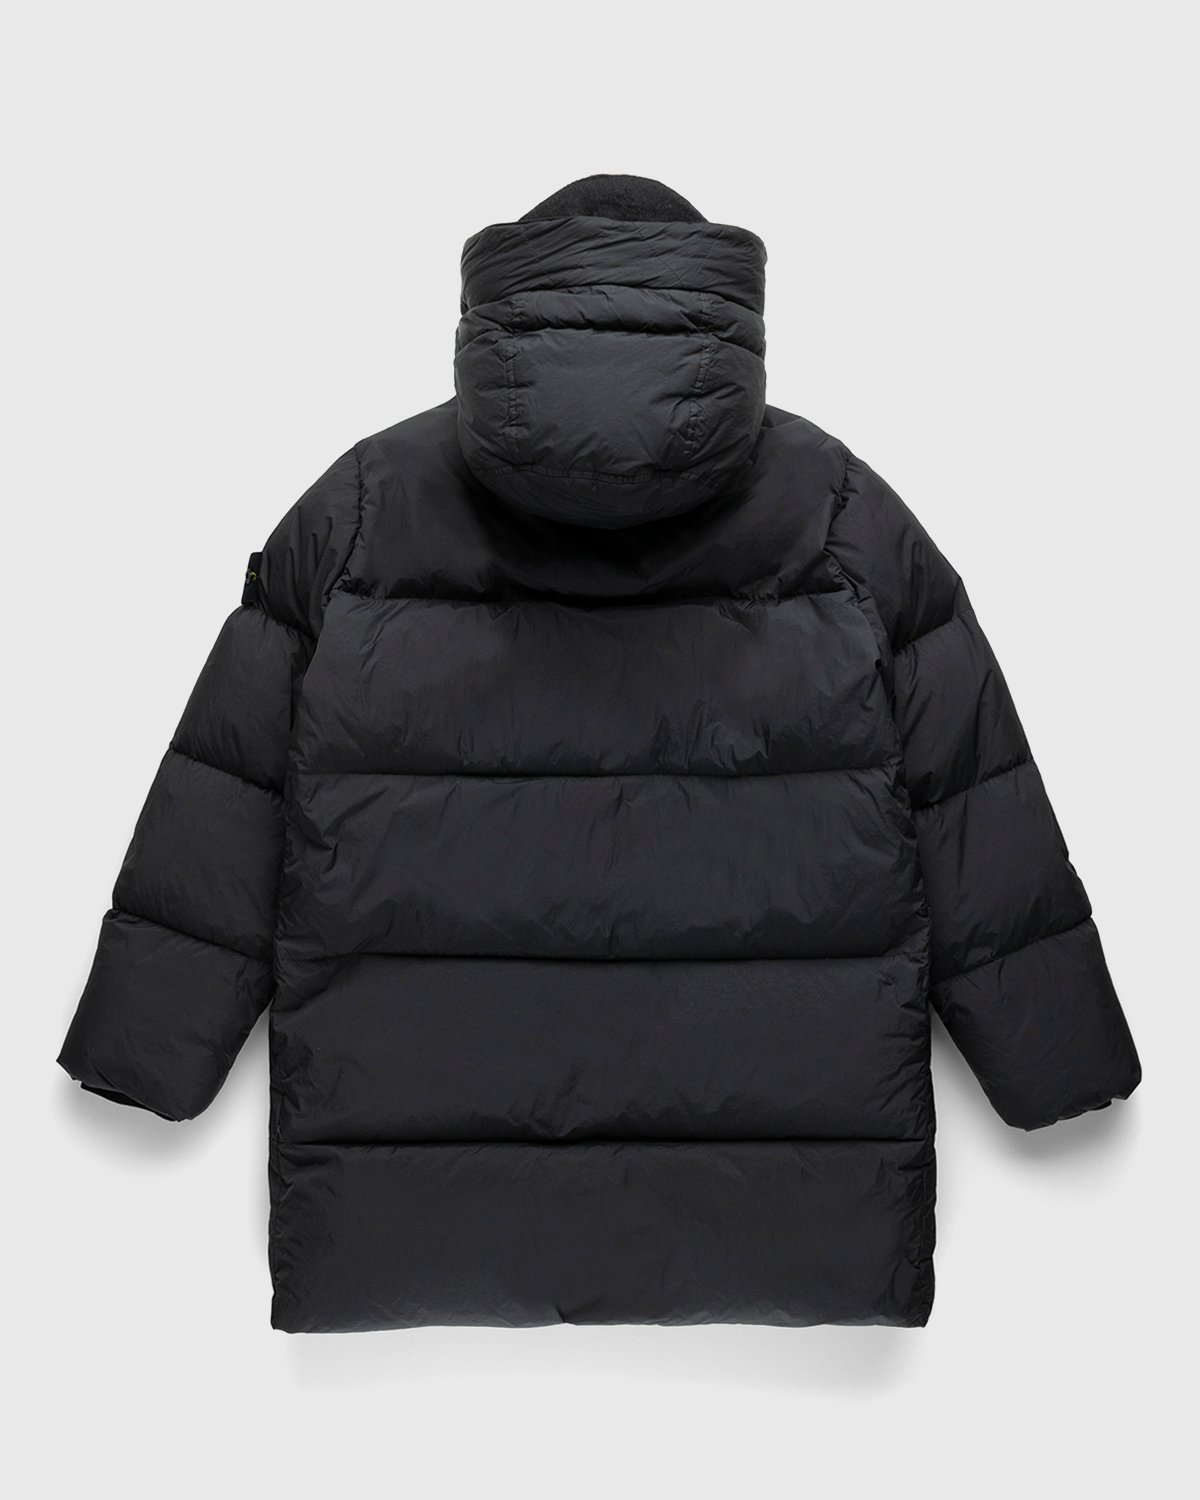 Stone Island - Garment Dyed Real Down Blouson Charcoal - Clothing - Black - Image 2